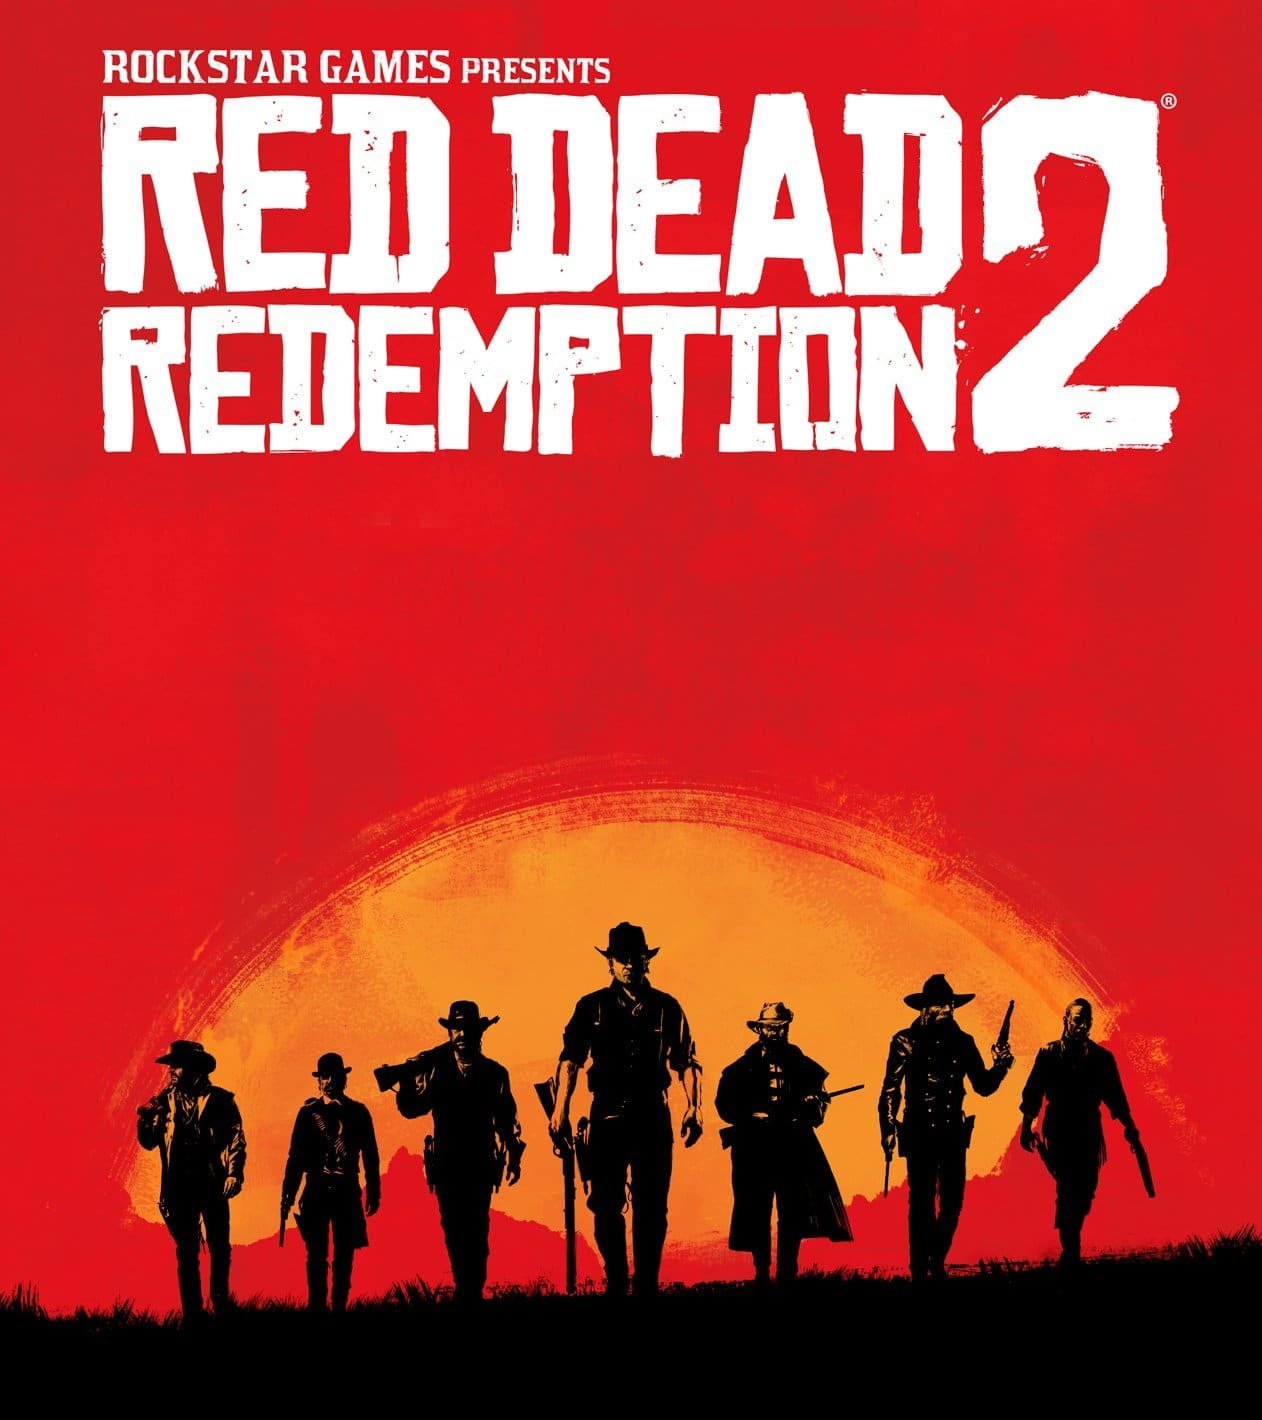 Red Dead Redemption 2 Pre-Order on Amazon